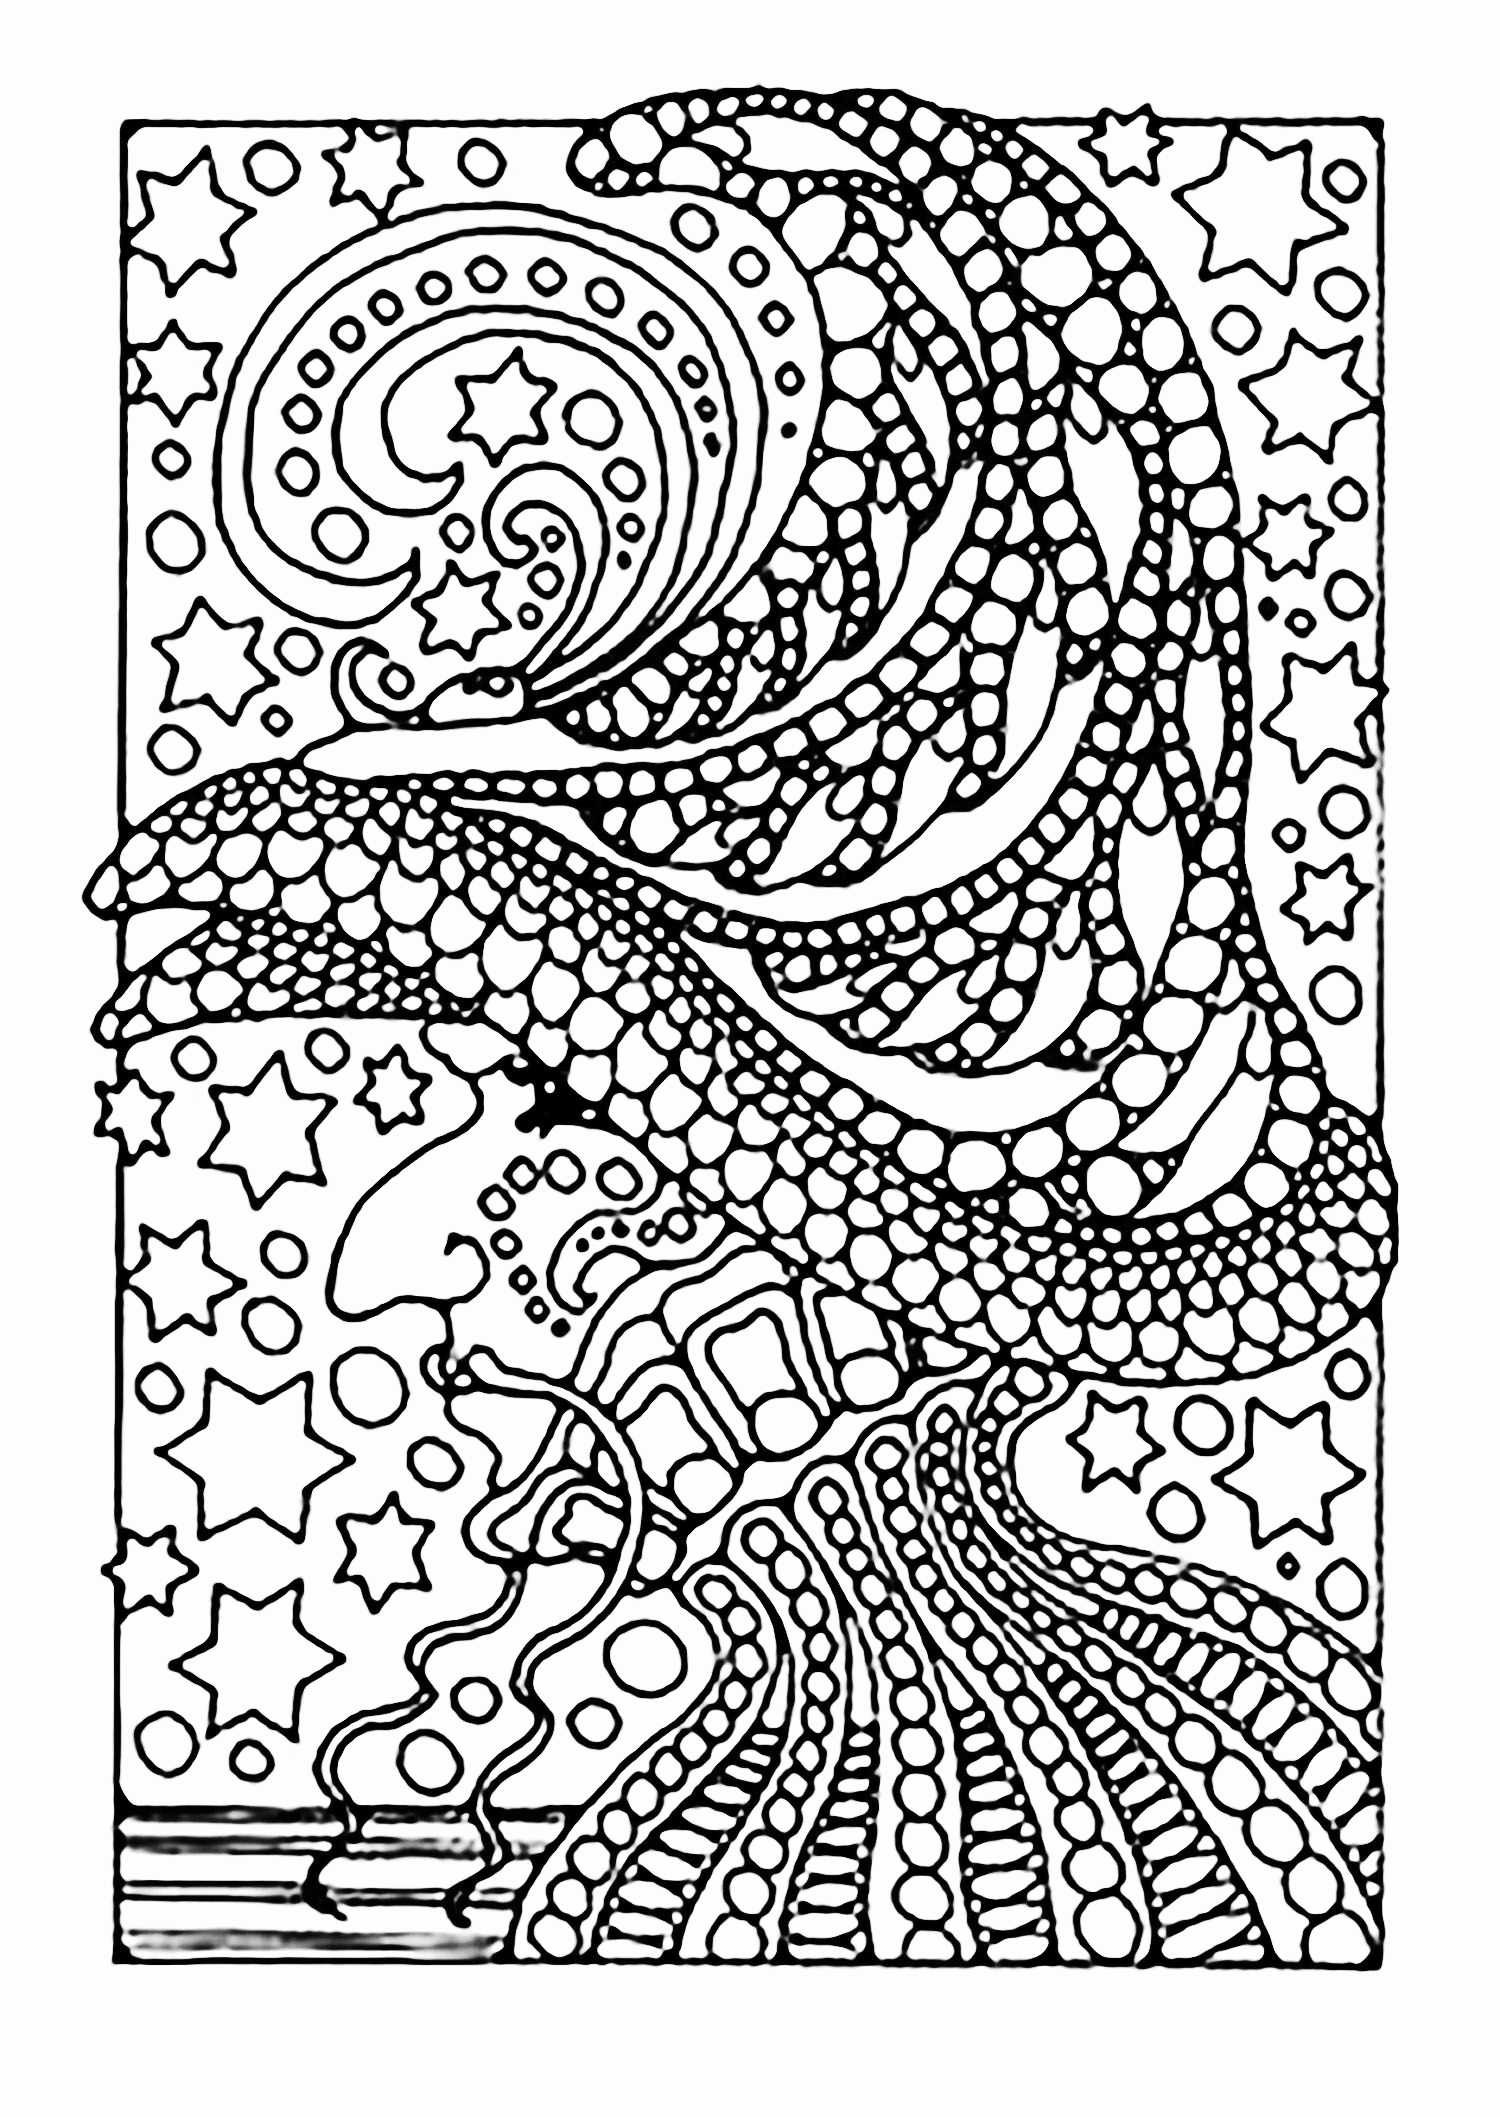 10 Fashionable Vw Flower Vase 2024 free download vw flower vase of color by number coloring pages free new vases flower vase coloring with color by number coloring pages free awesome cool coloring page unique witch coloring pages new crayo